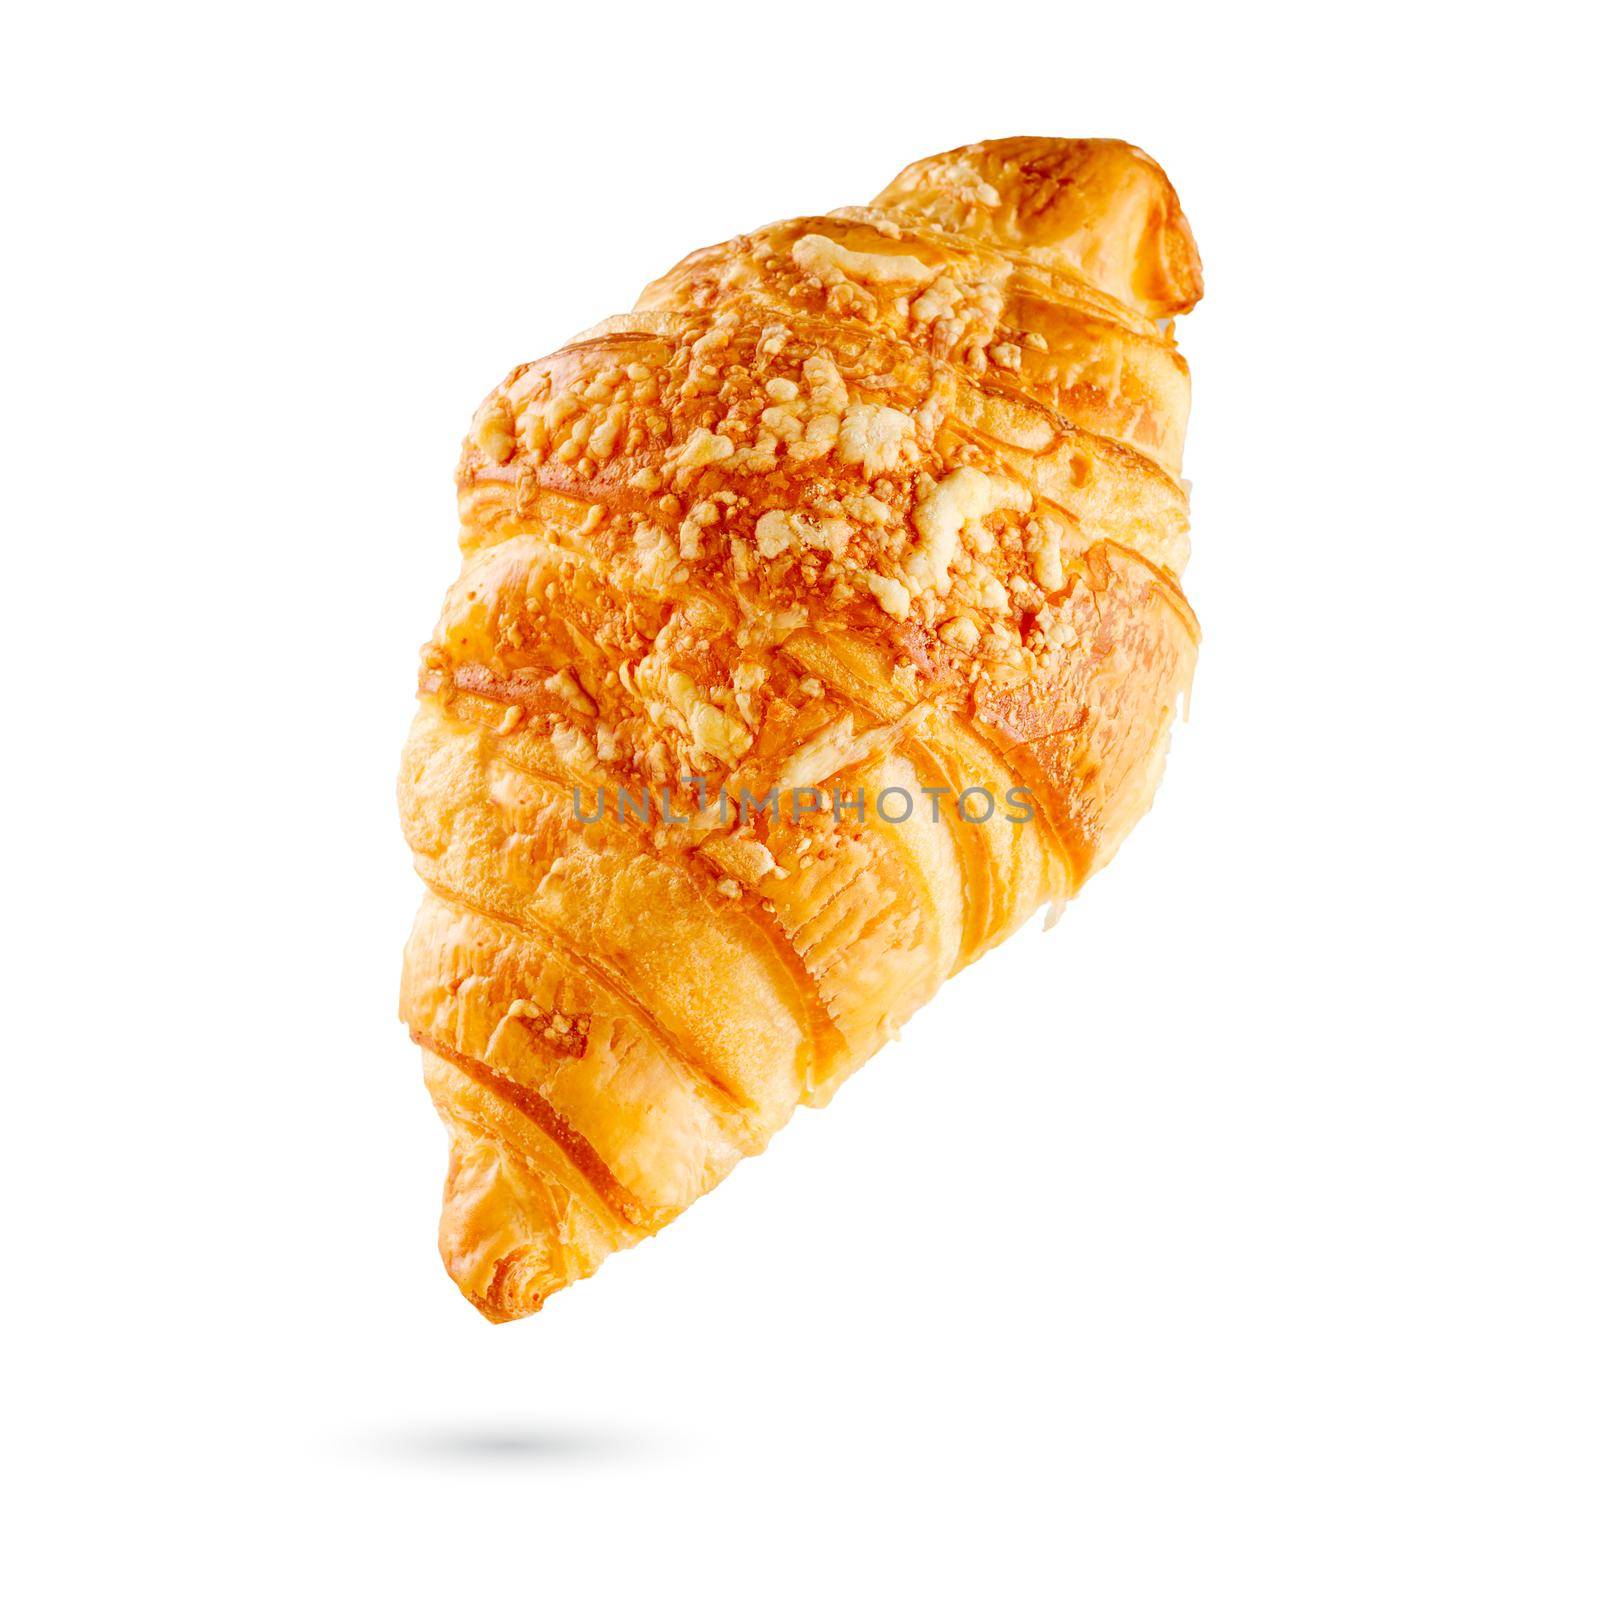 Fresh croissant with cheese isolated on white background by PhotoTime